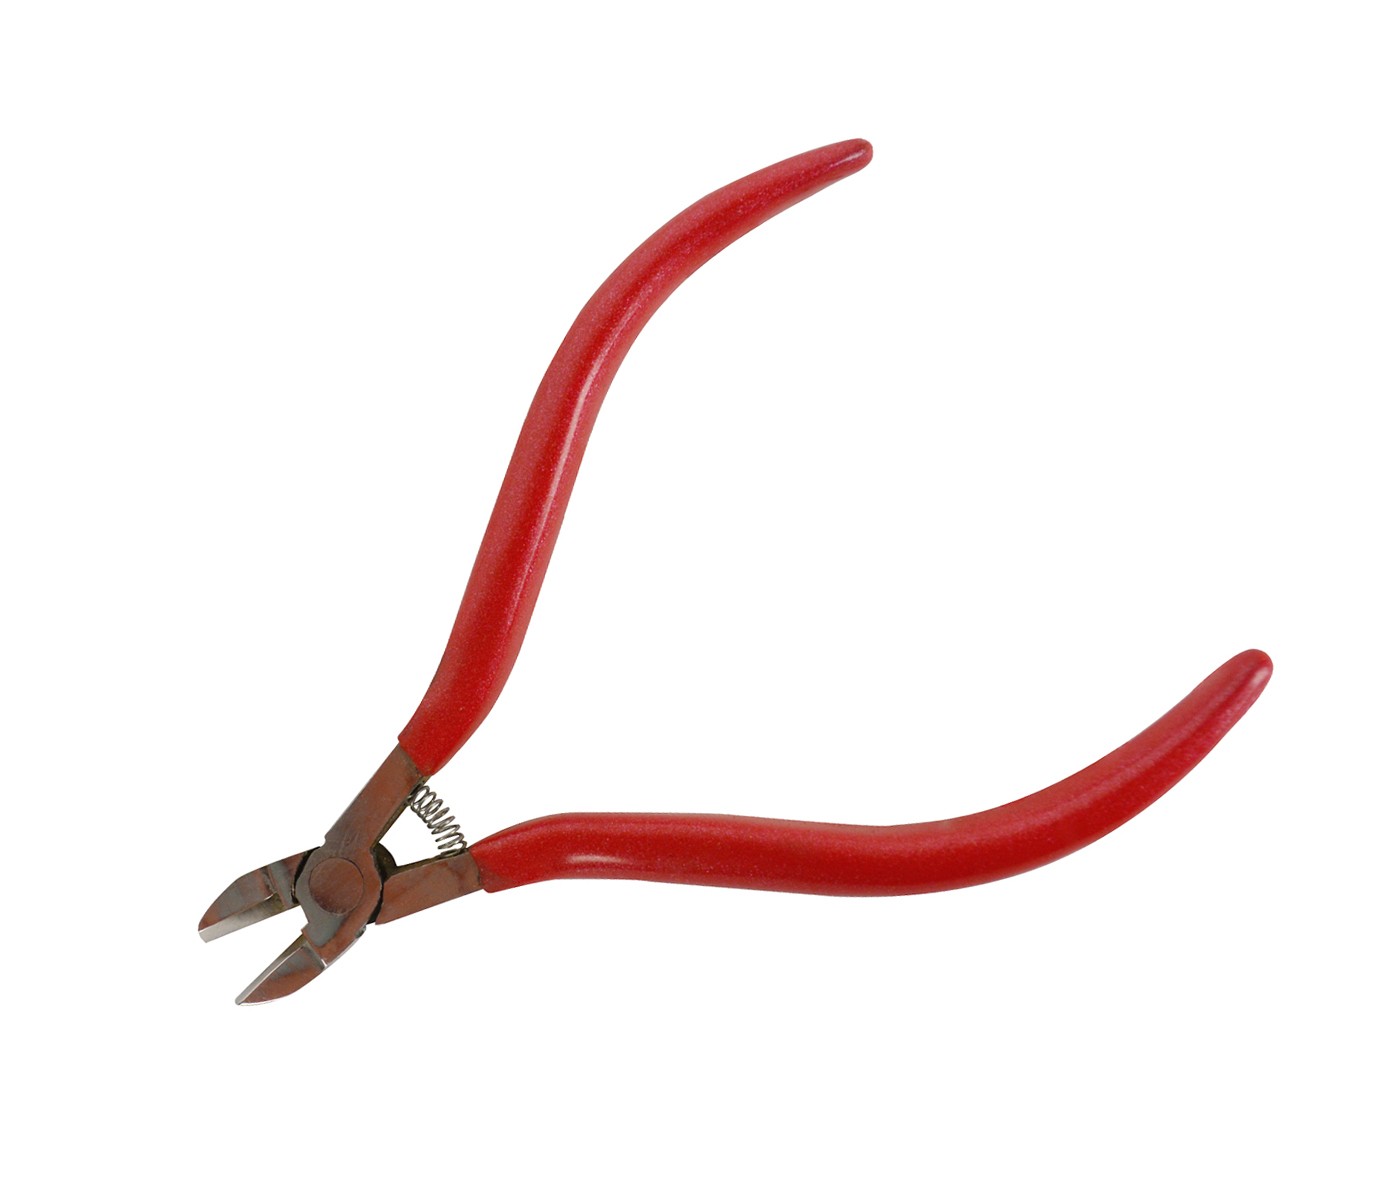 5" Side Cutter Pliers with Spring